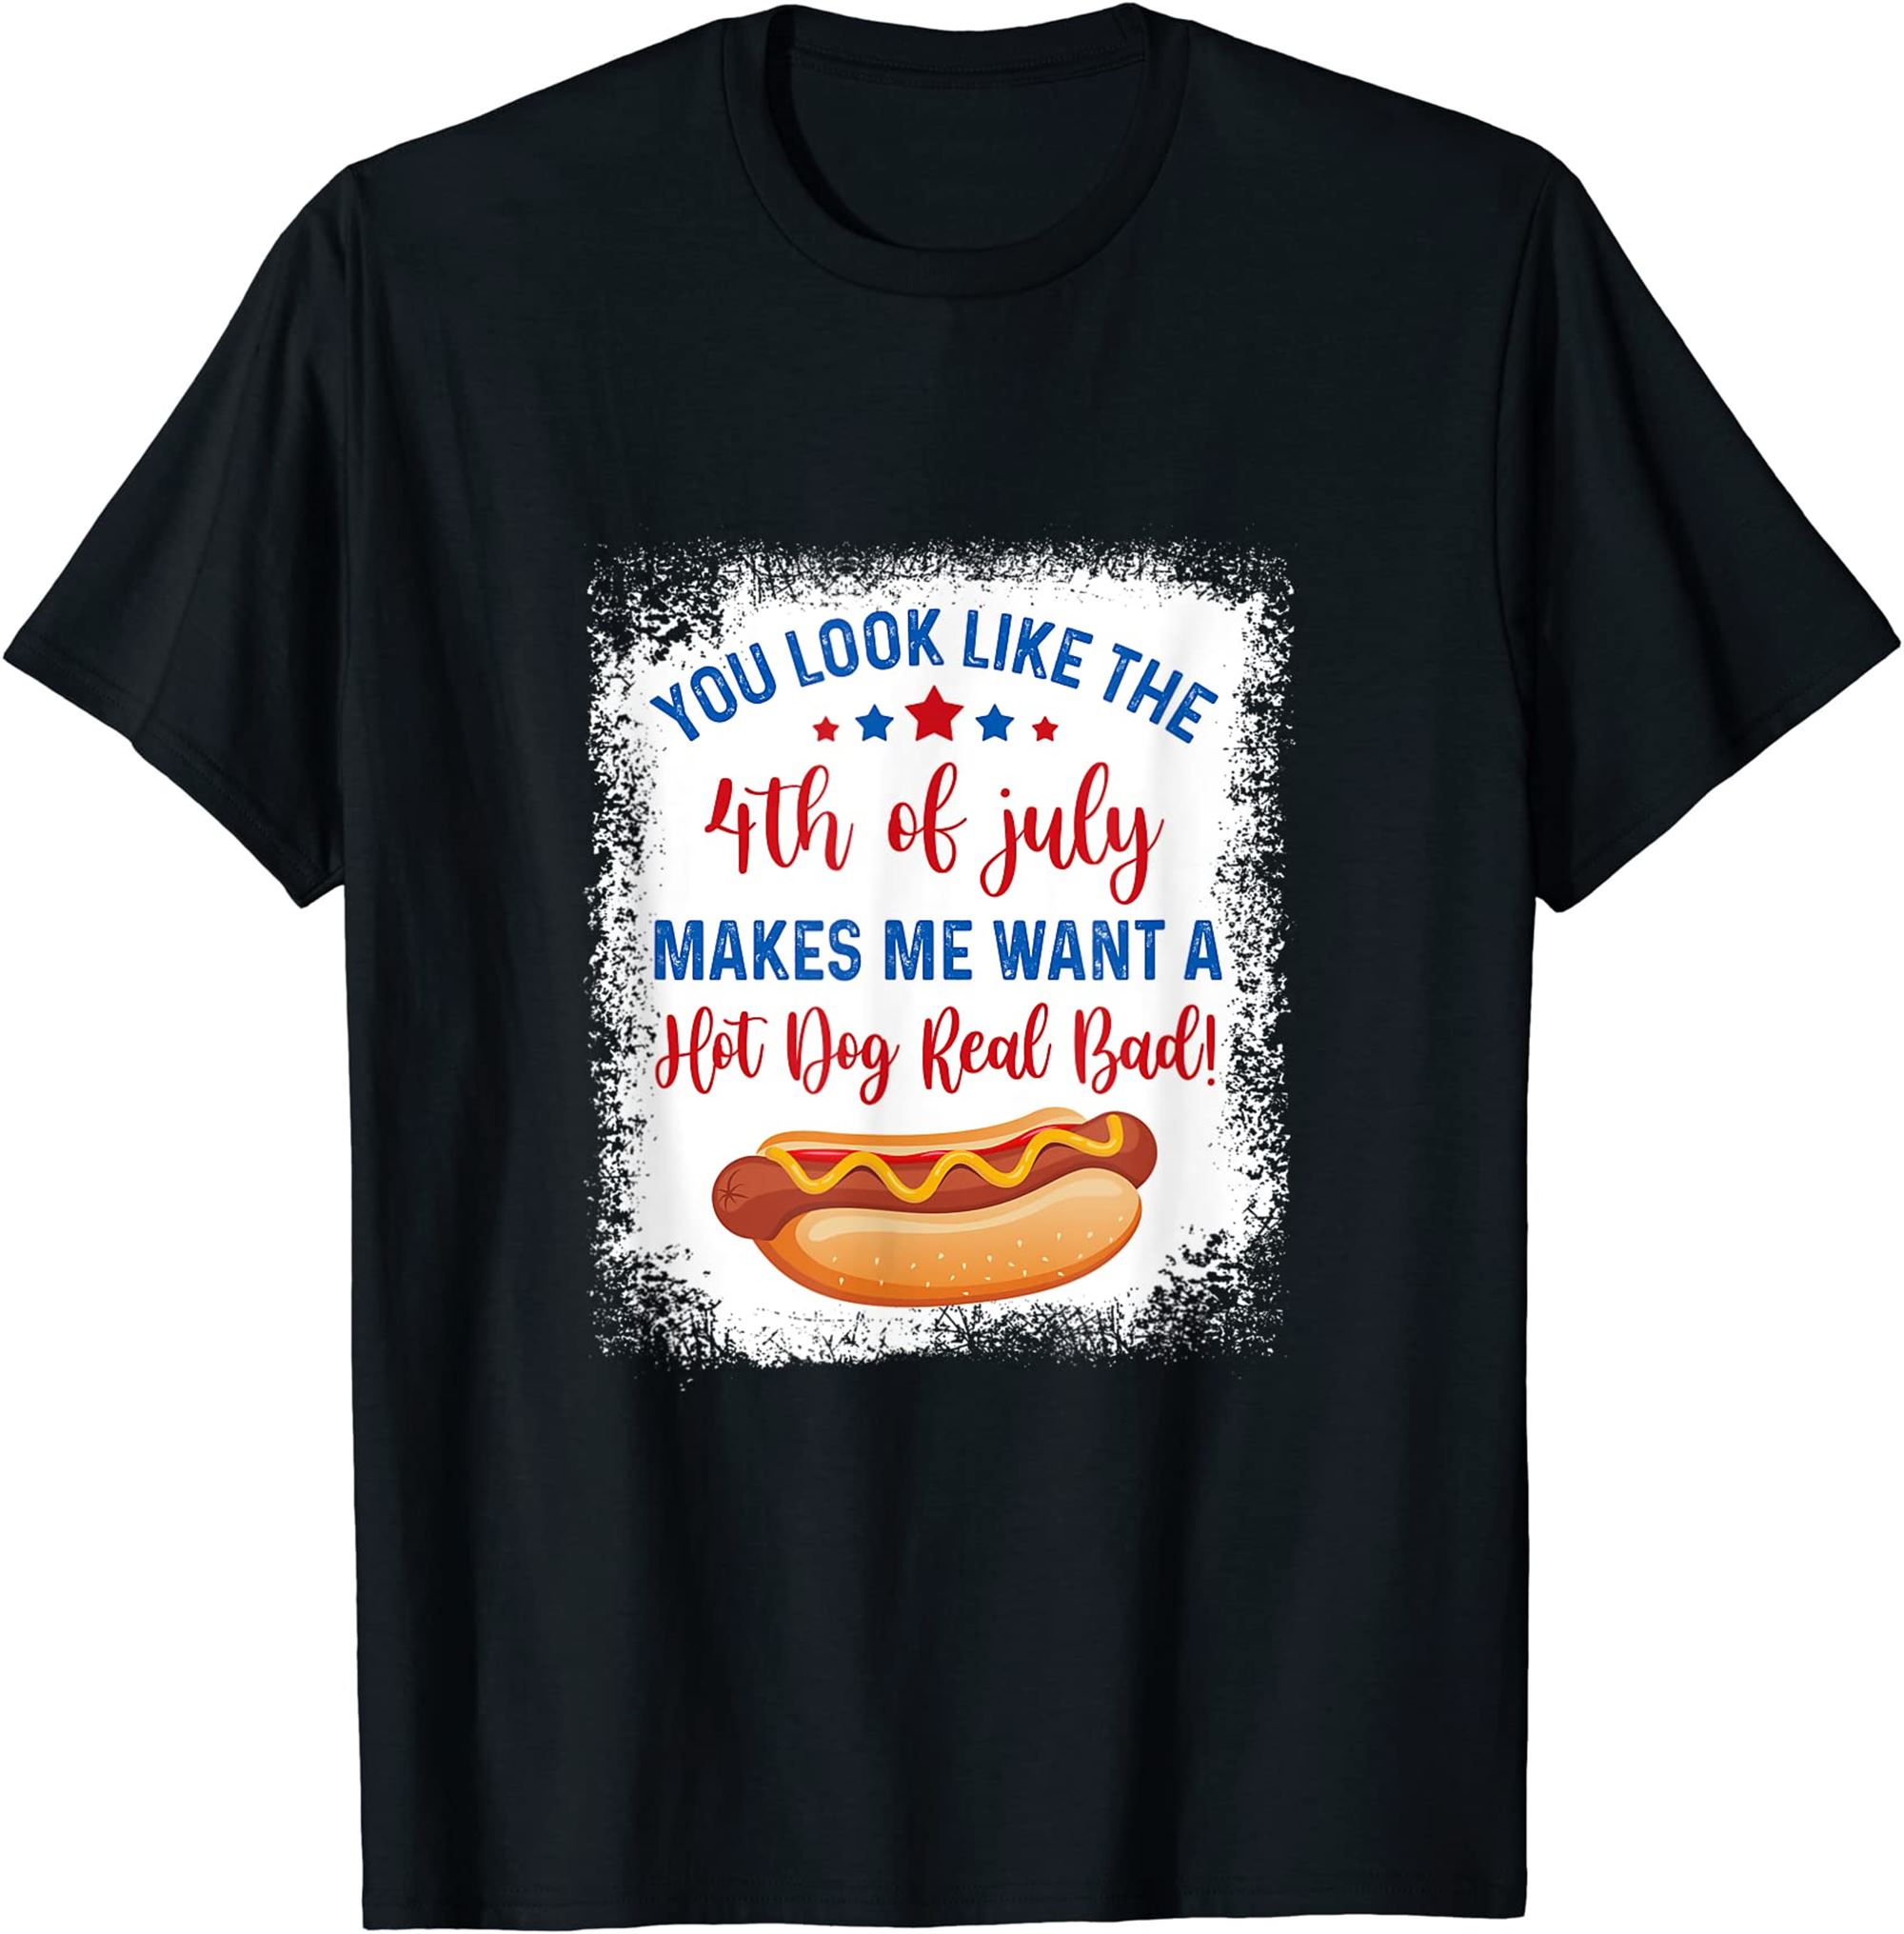 You Look Like 4th Of July Makes Me Want A Hot Dog Real Bad T-shirt Full Size Up To 5xl